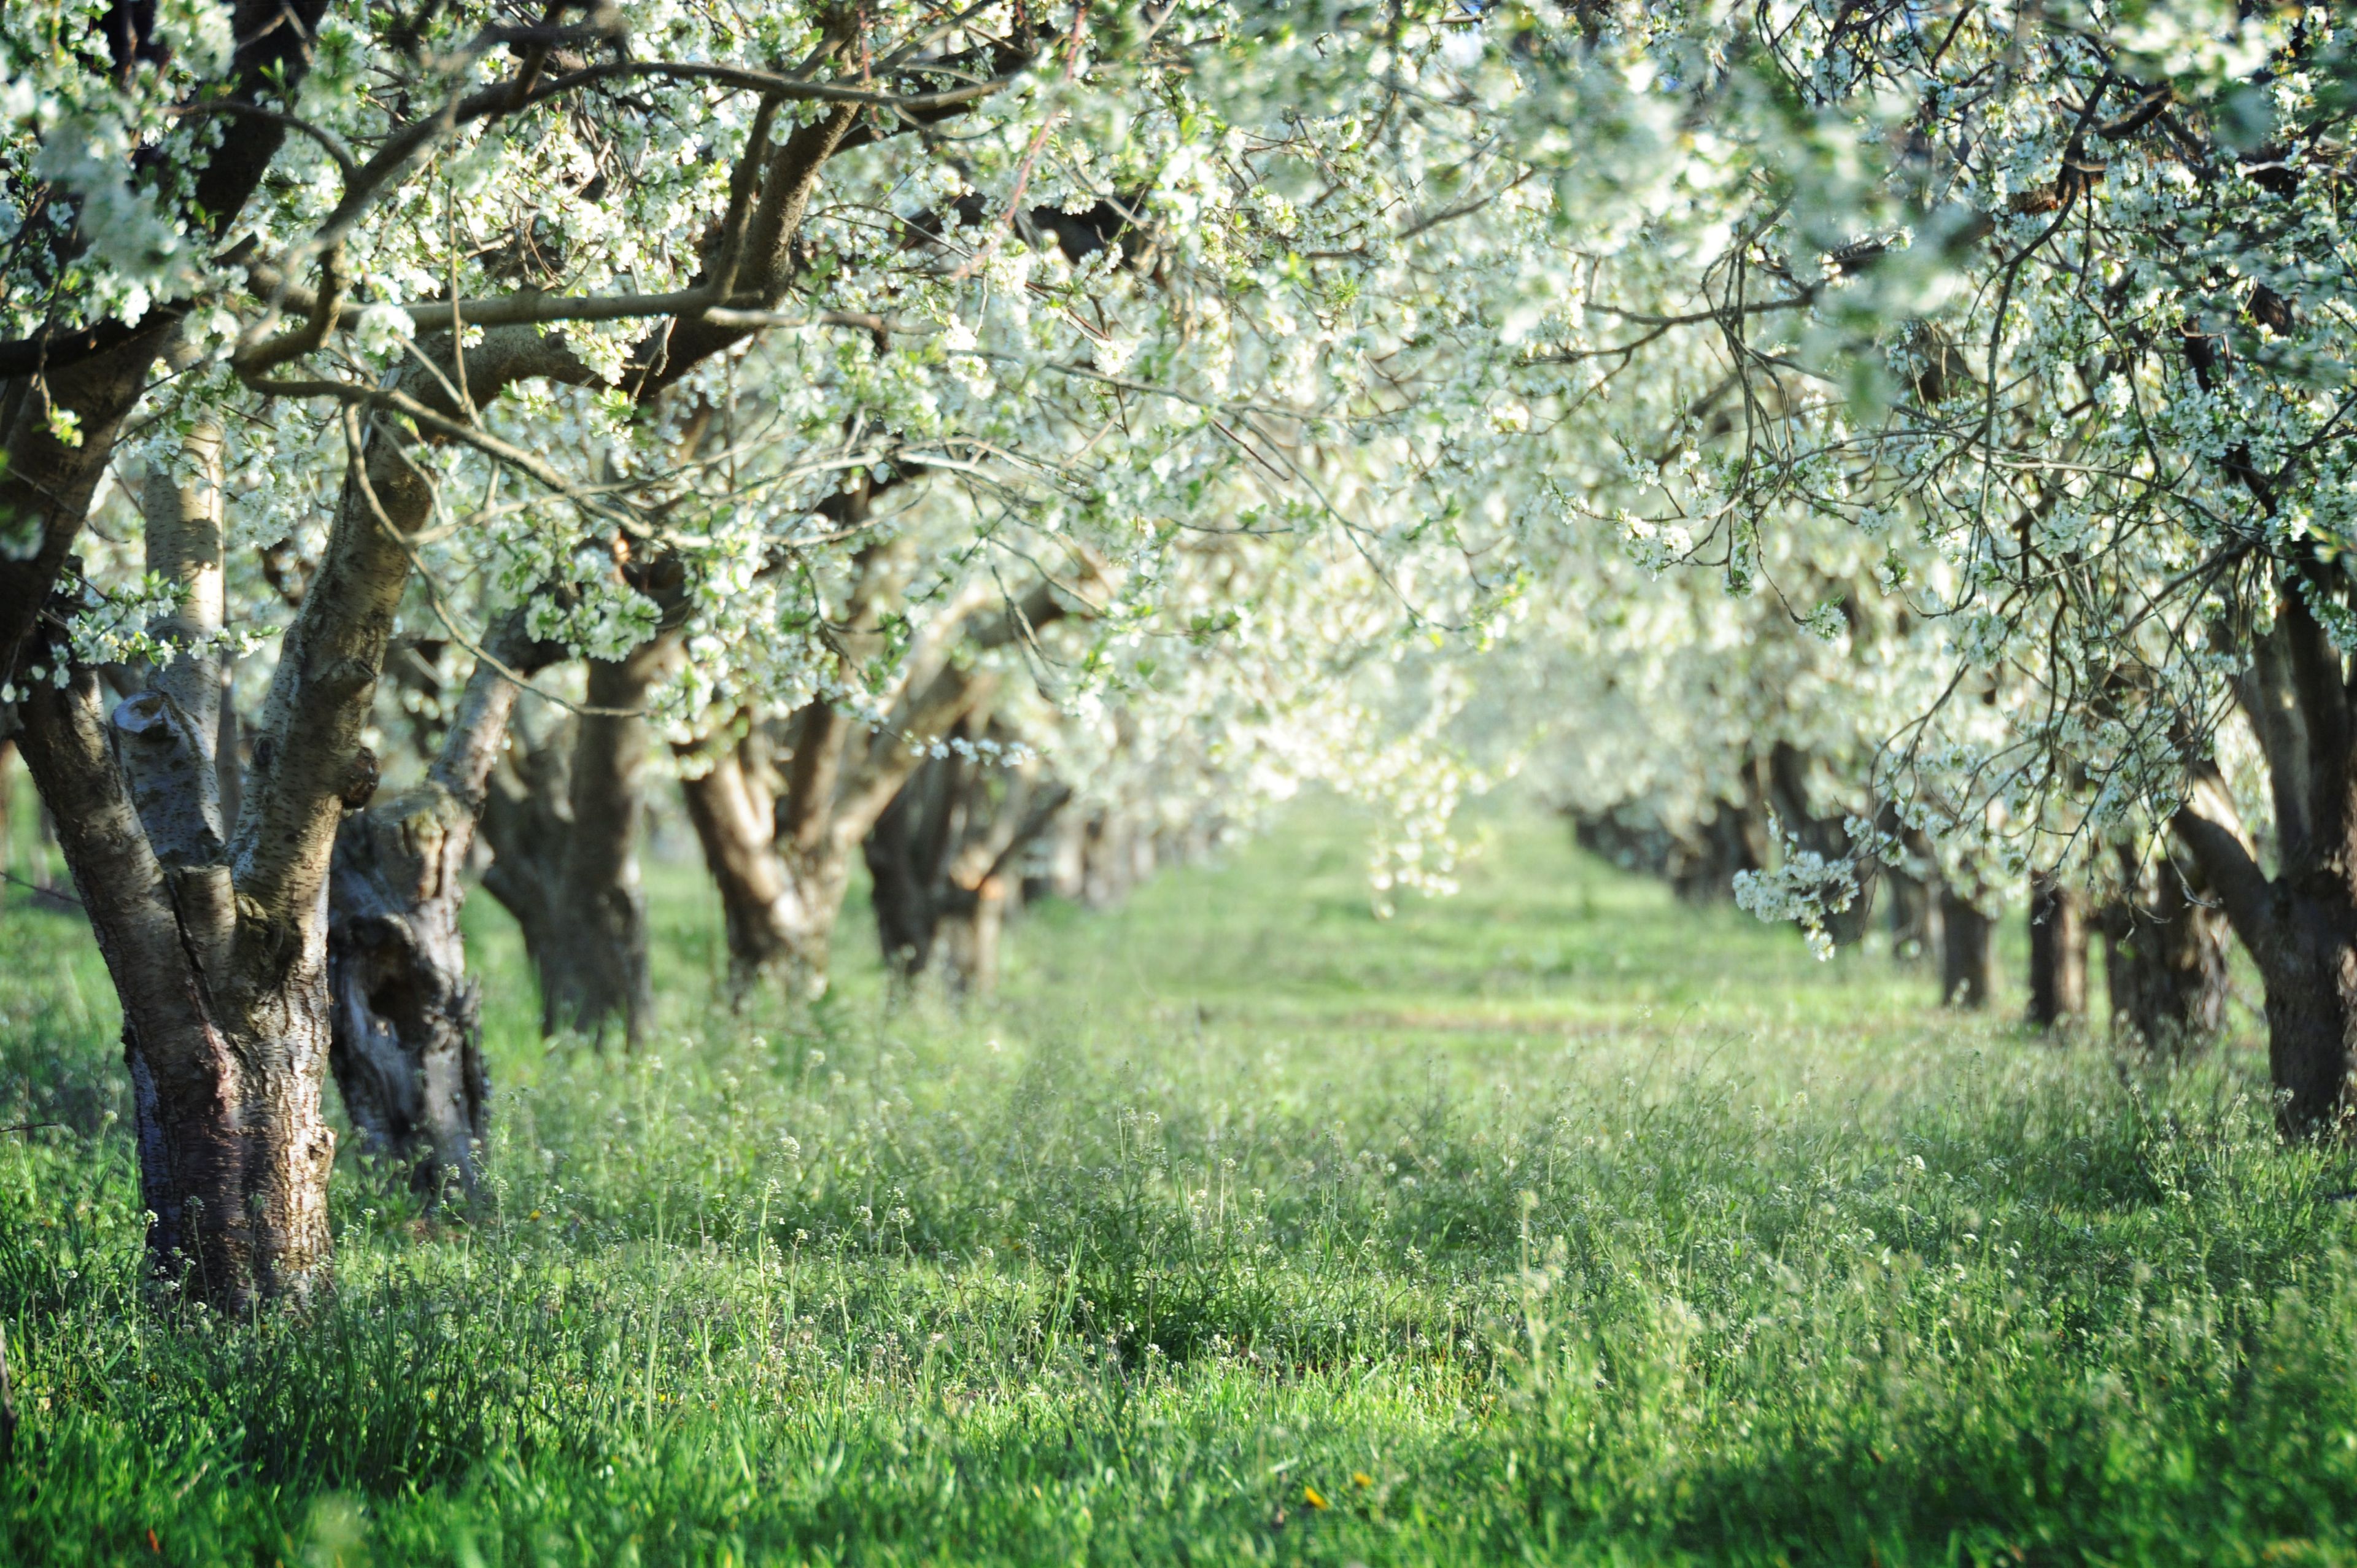 An orchard with rows of trees with white blossoms.